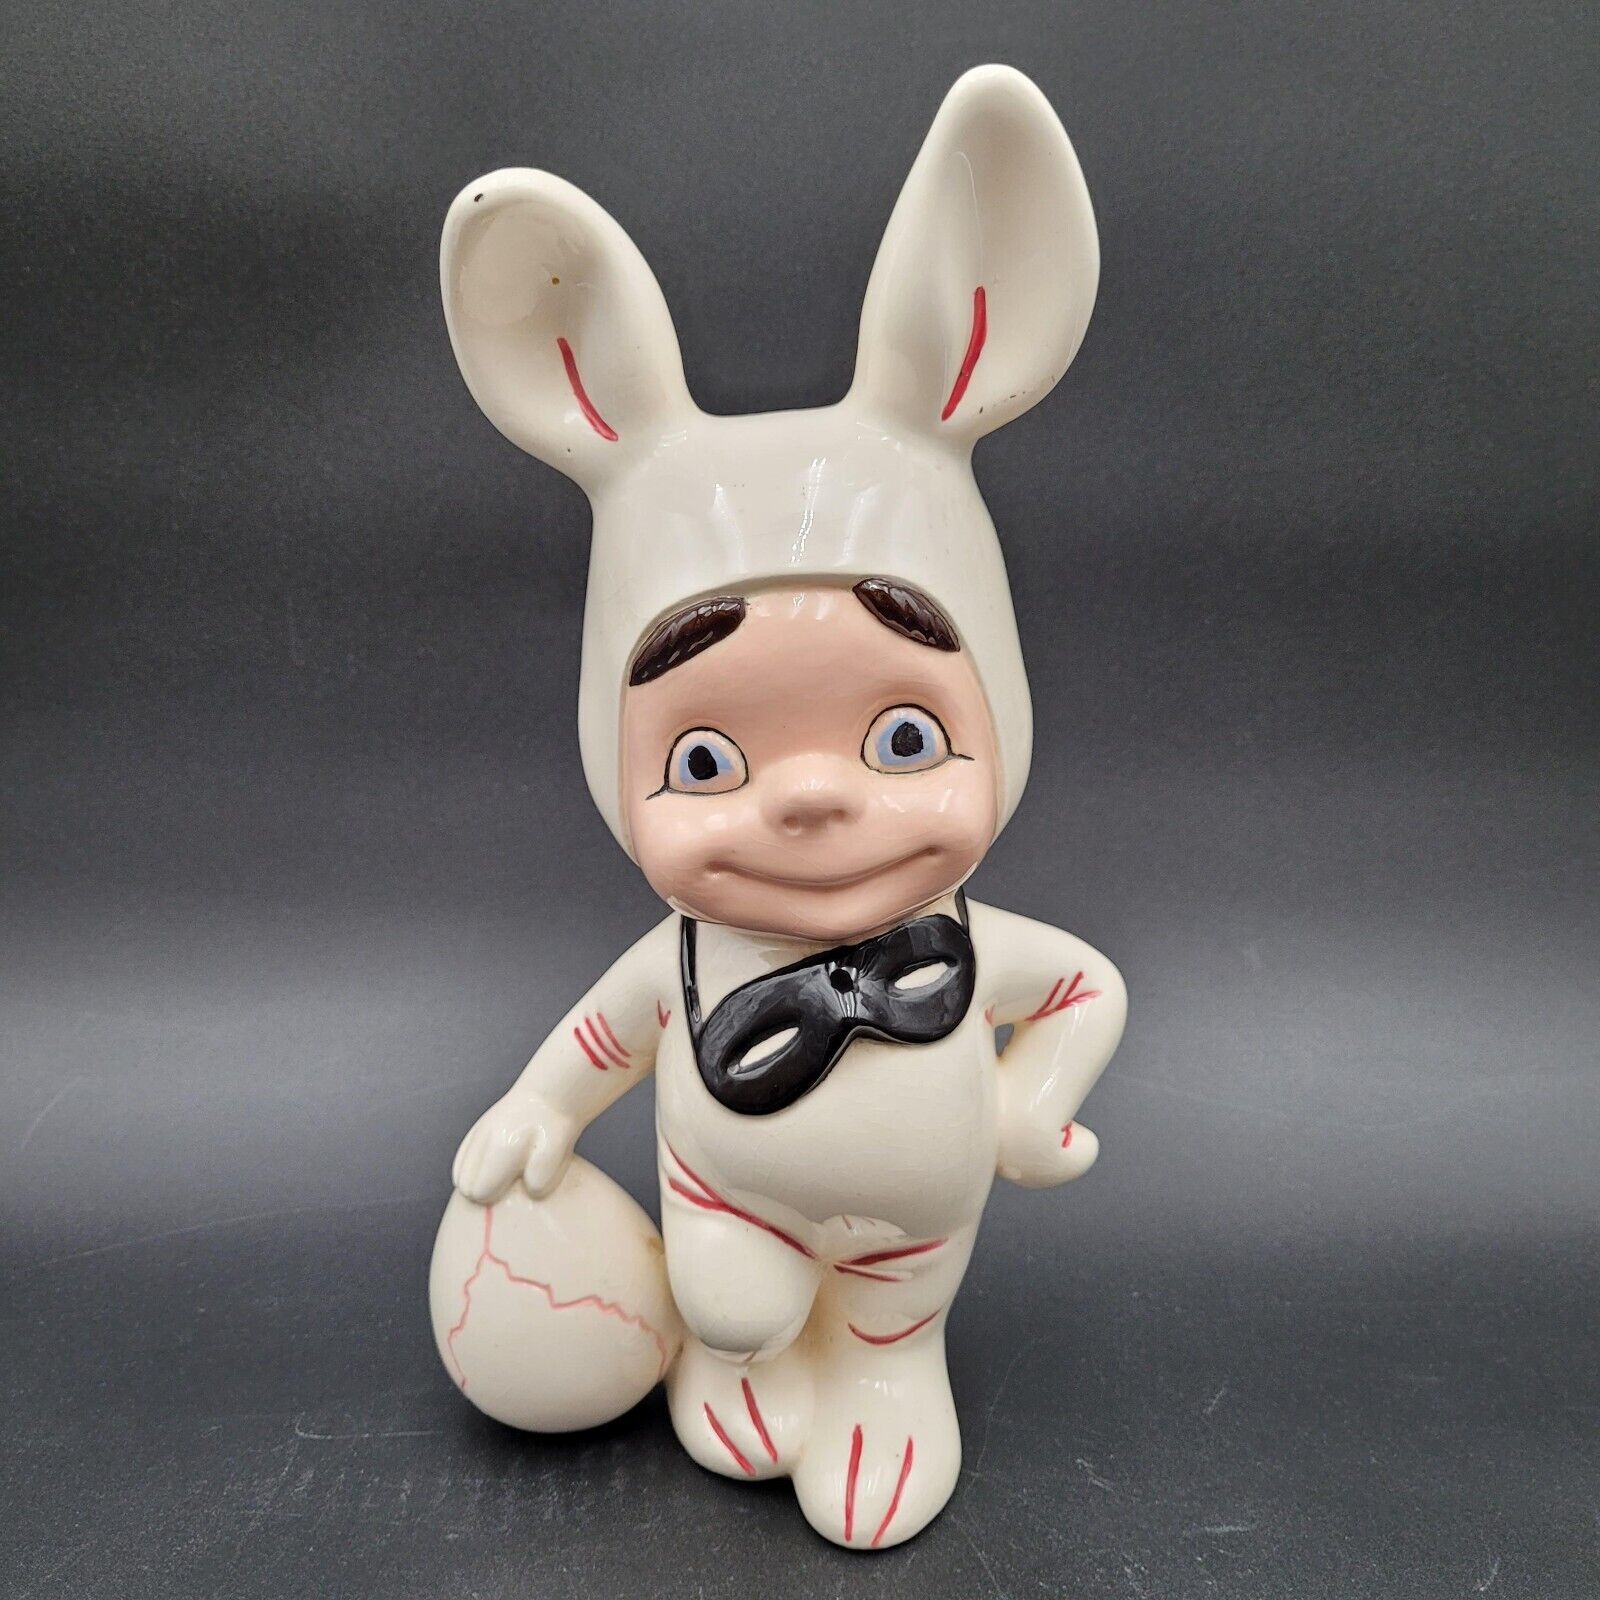 Primary image for Vintage 1983 Atlantic Mold Ceramic Smiling Child White Easter Bunny Costume 12"